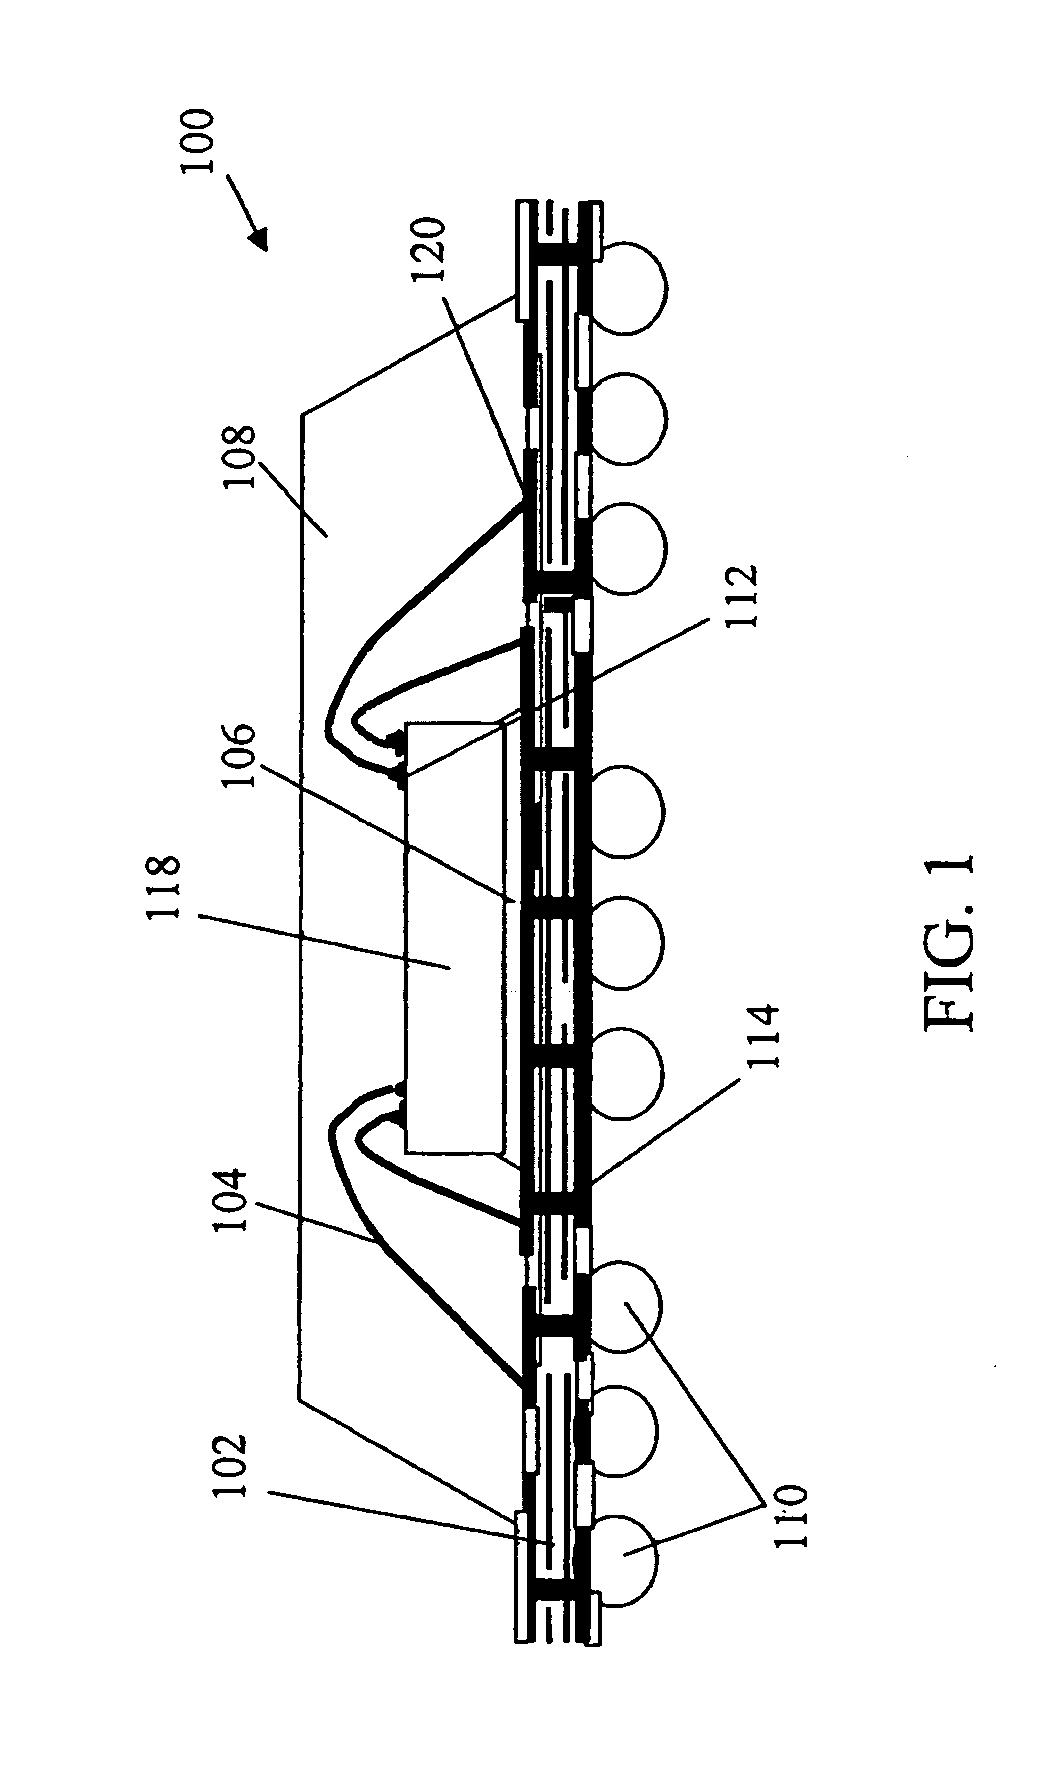 Interconnect structure and formation for package stacking of molded plastic area array package